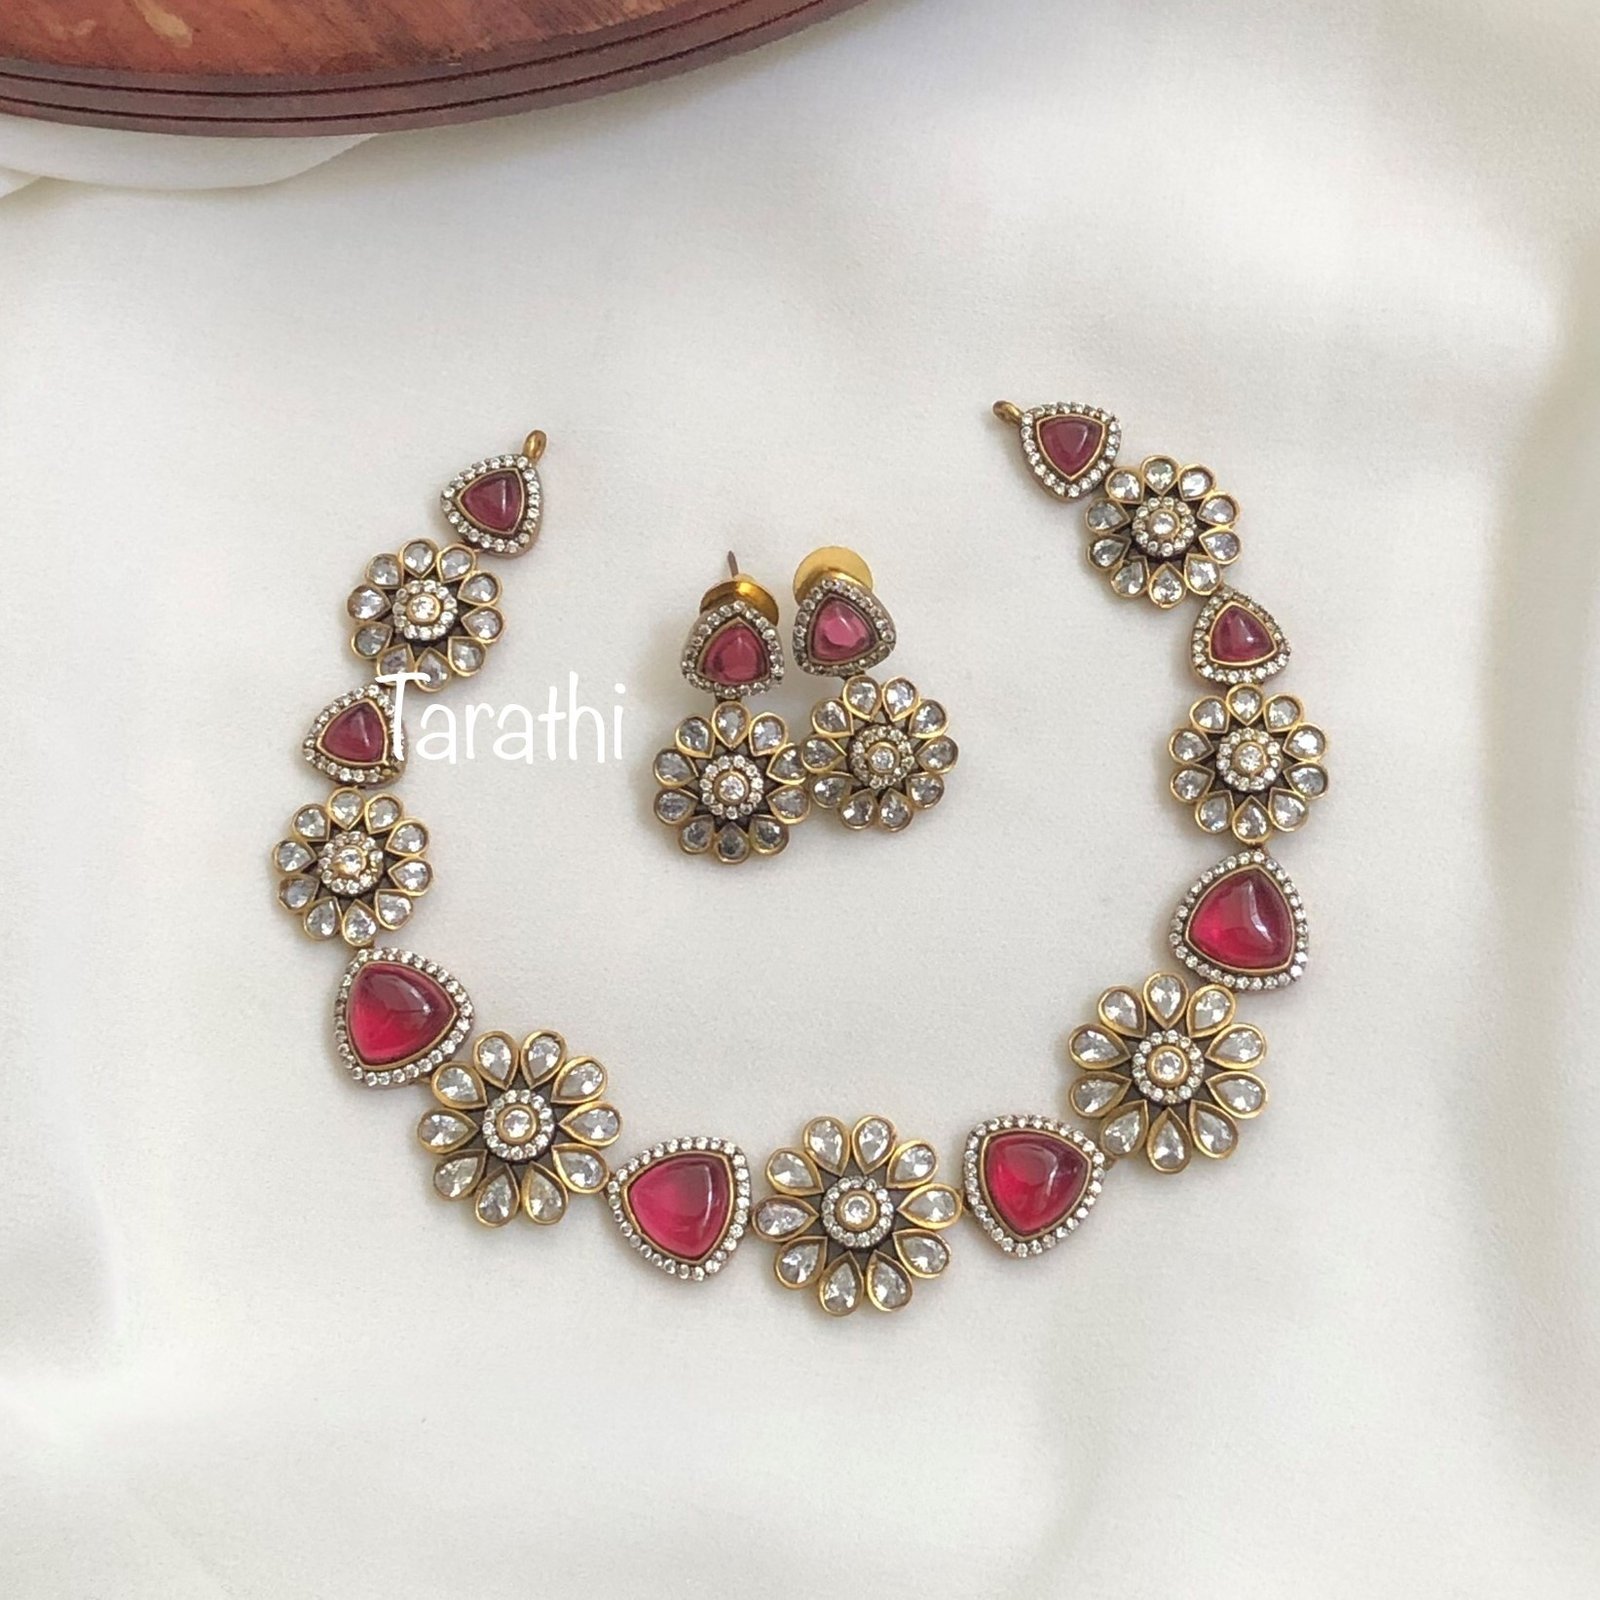 Victorian Jewellery Set You Should Try in 2023 – Nithilah